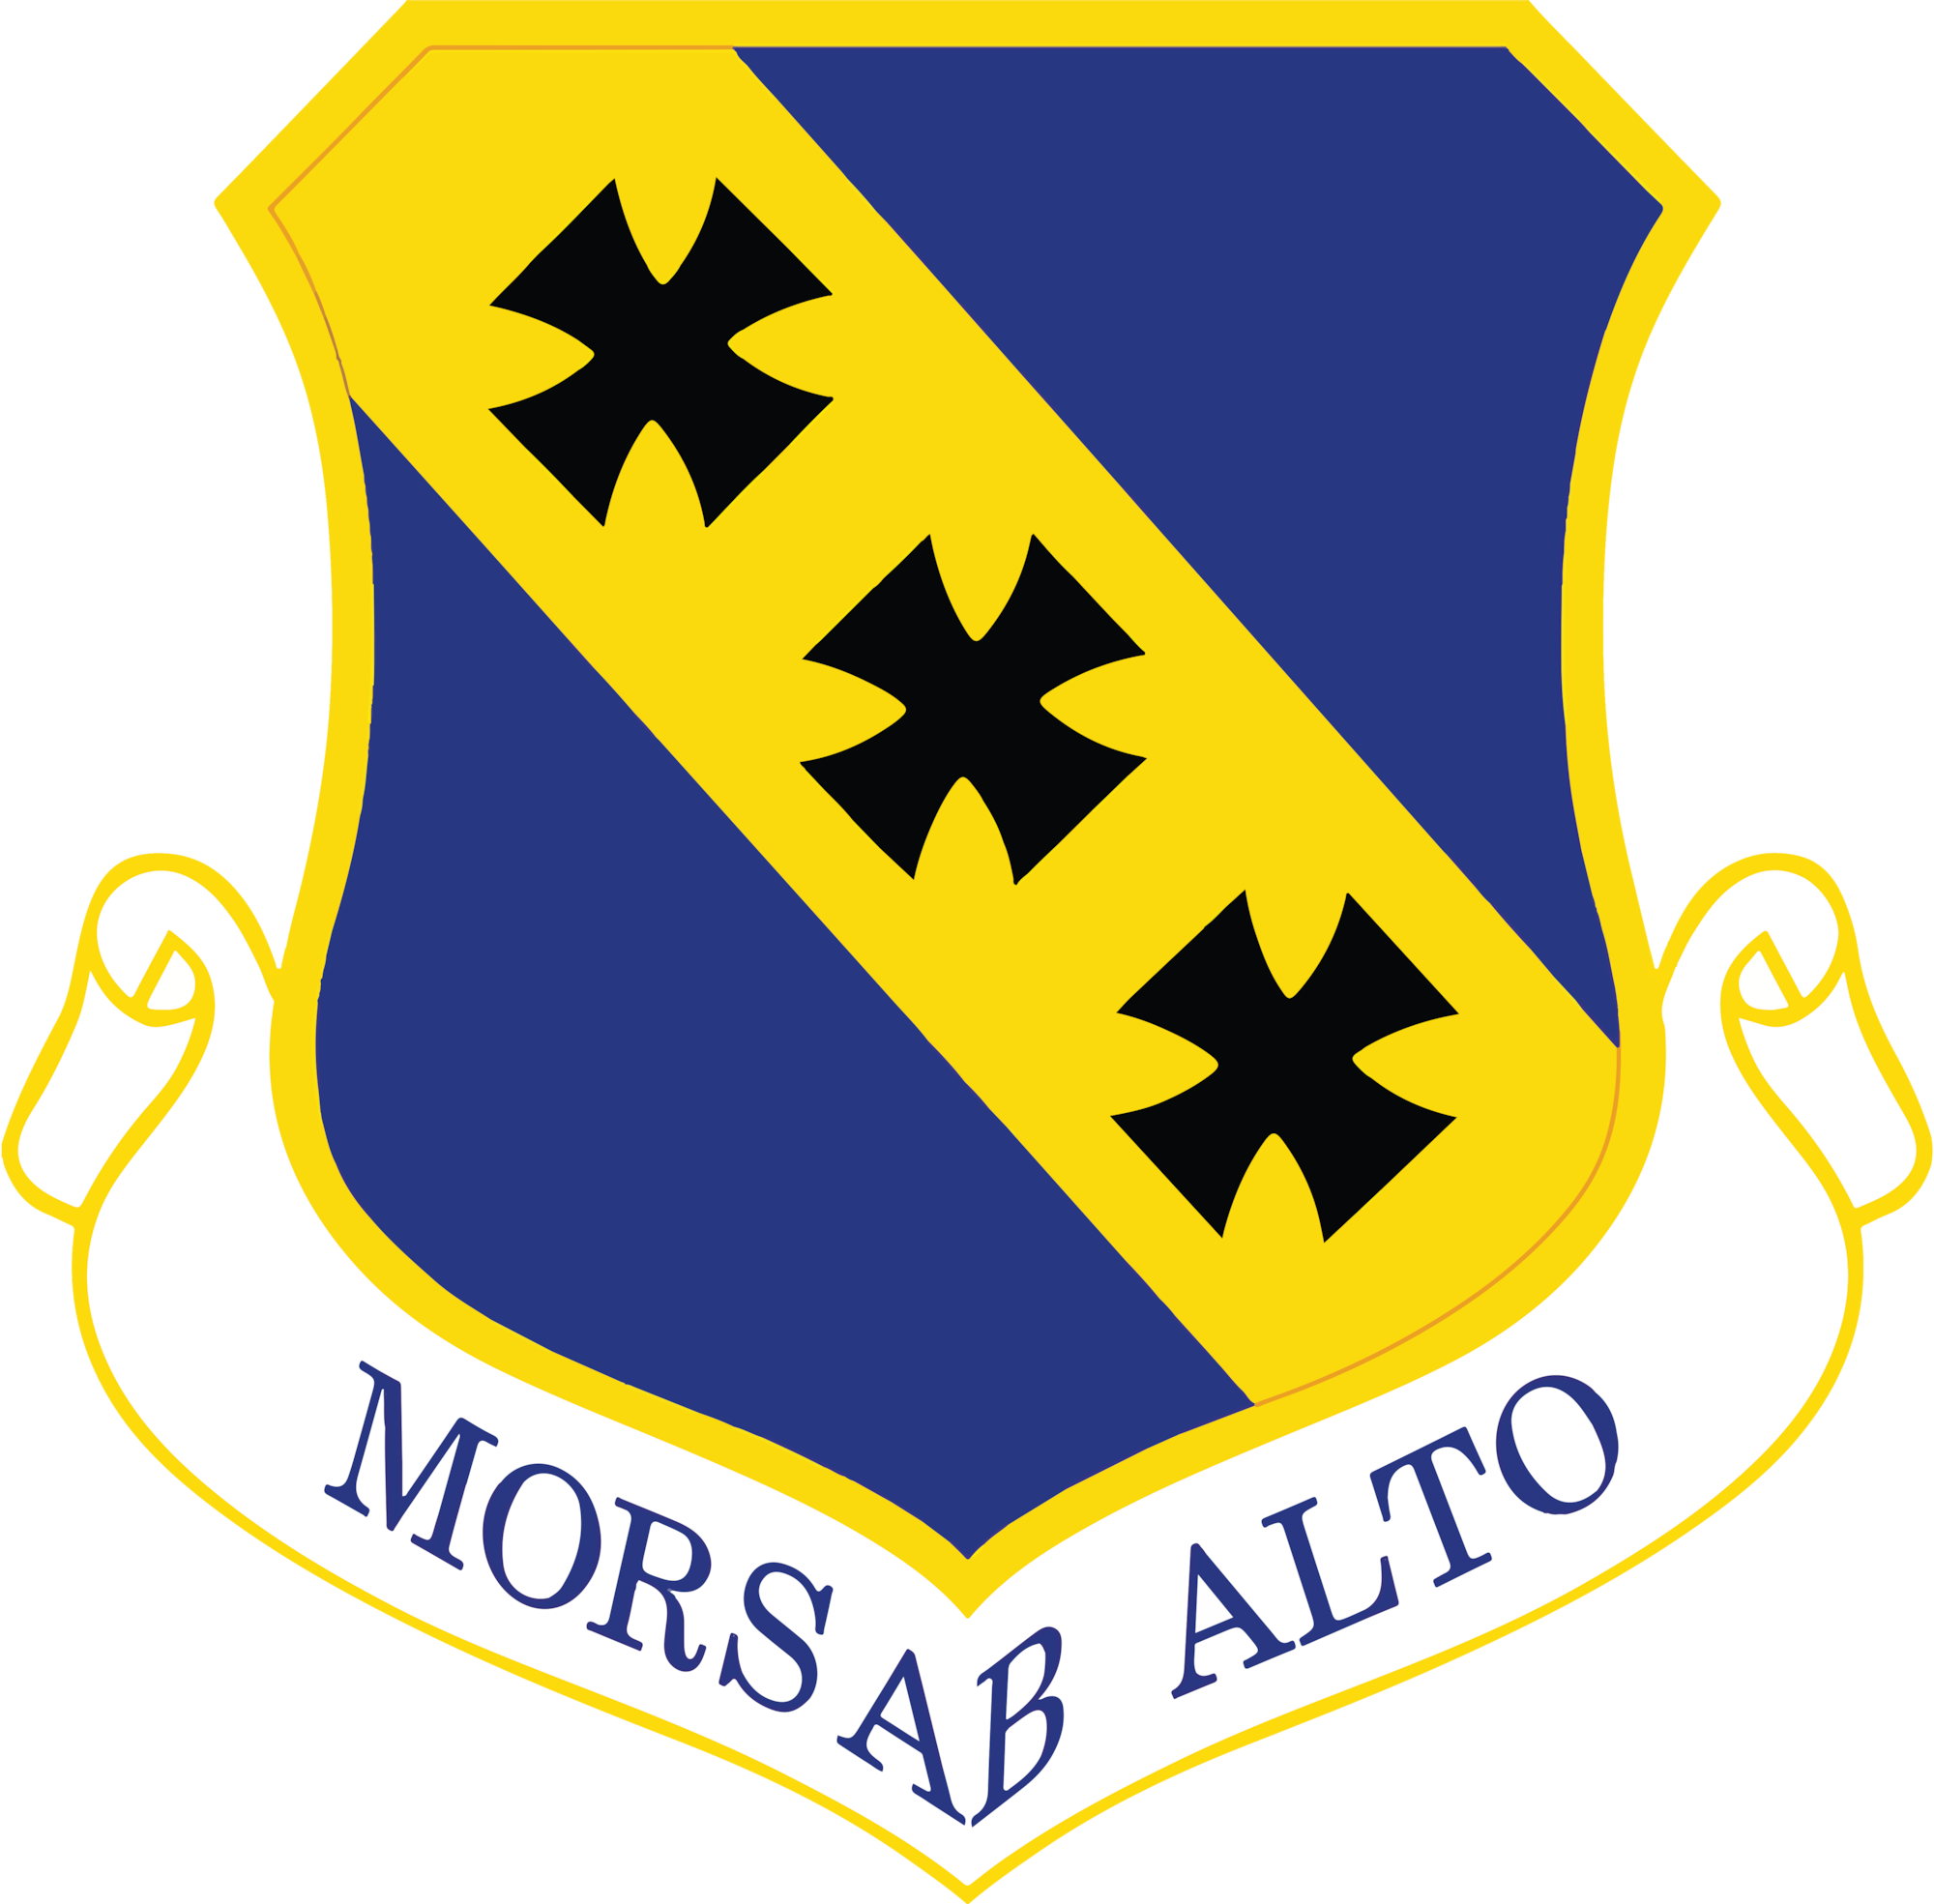 A blue shield with a yellow banner across with 3 black cross symbols. text mors ab alto along the bottom.